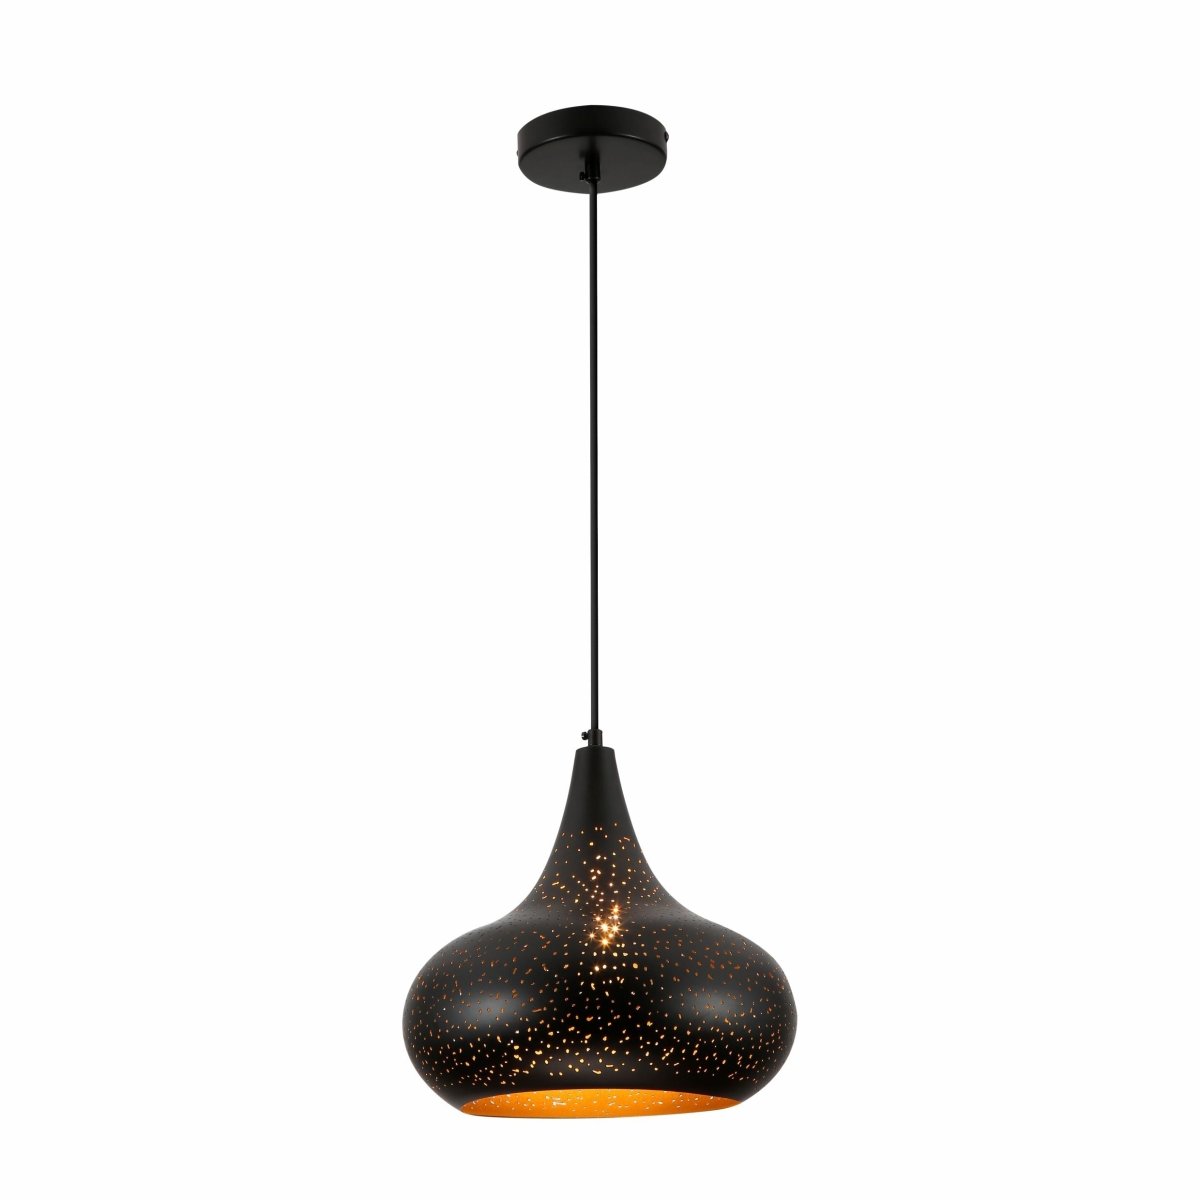 Main image of Black Gold Indian Dome Moroccan Night Milkyway Ceiling Pendant Light with E27 Fitting | TEKLED 150-18384